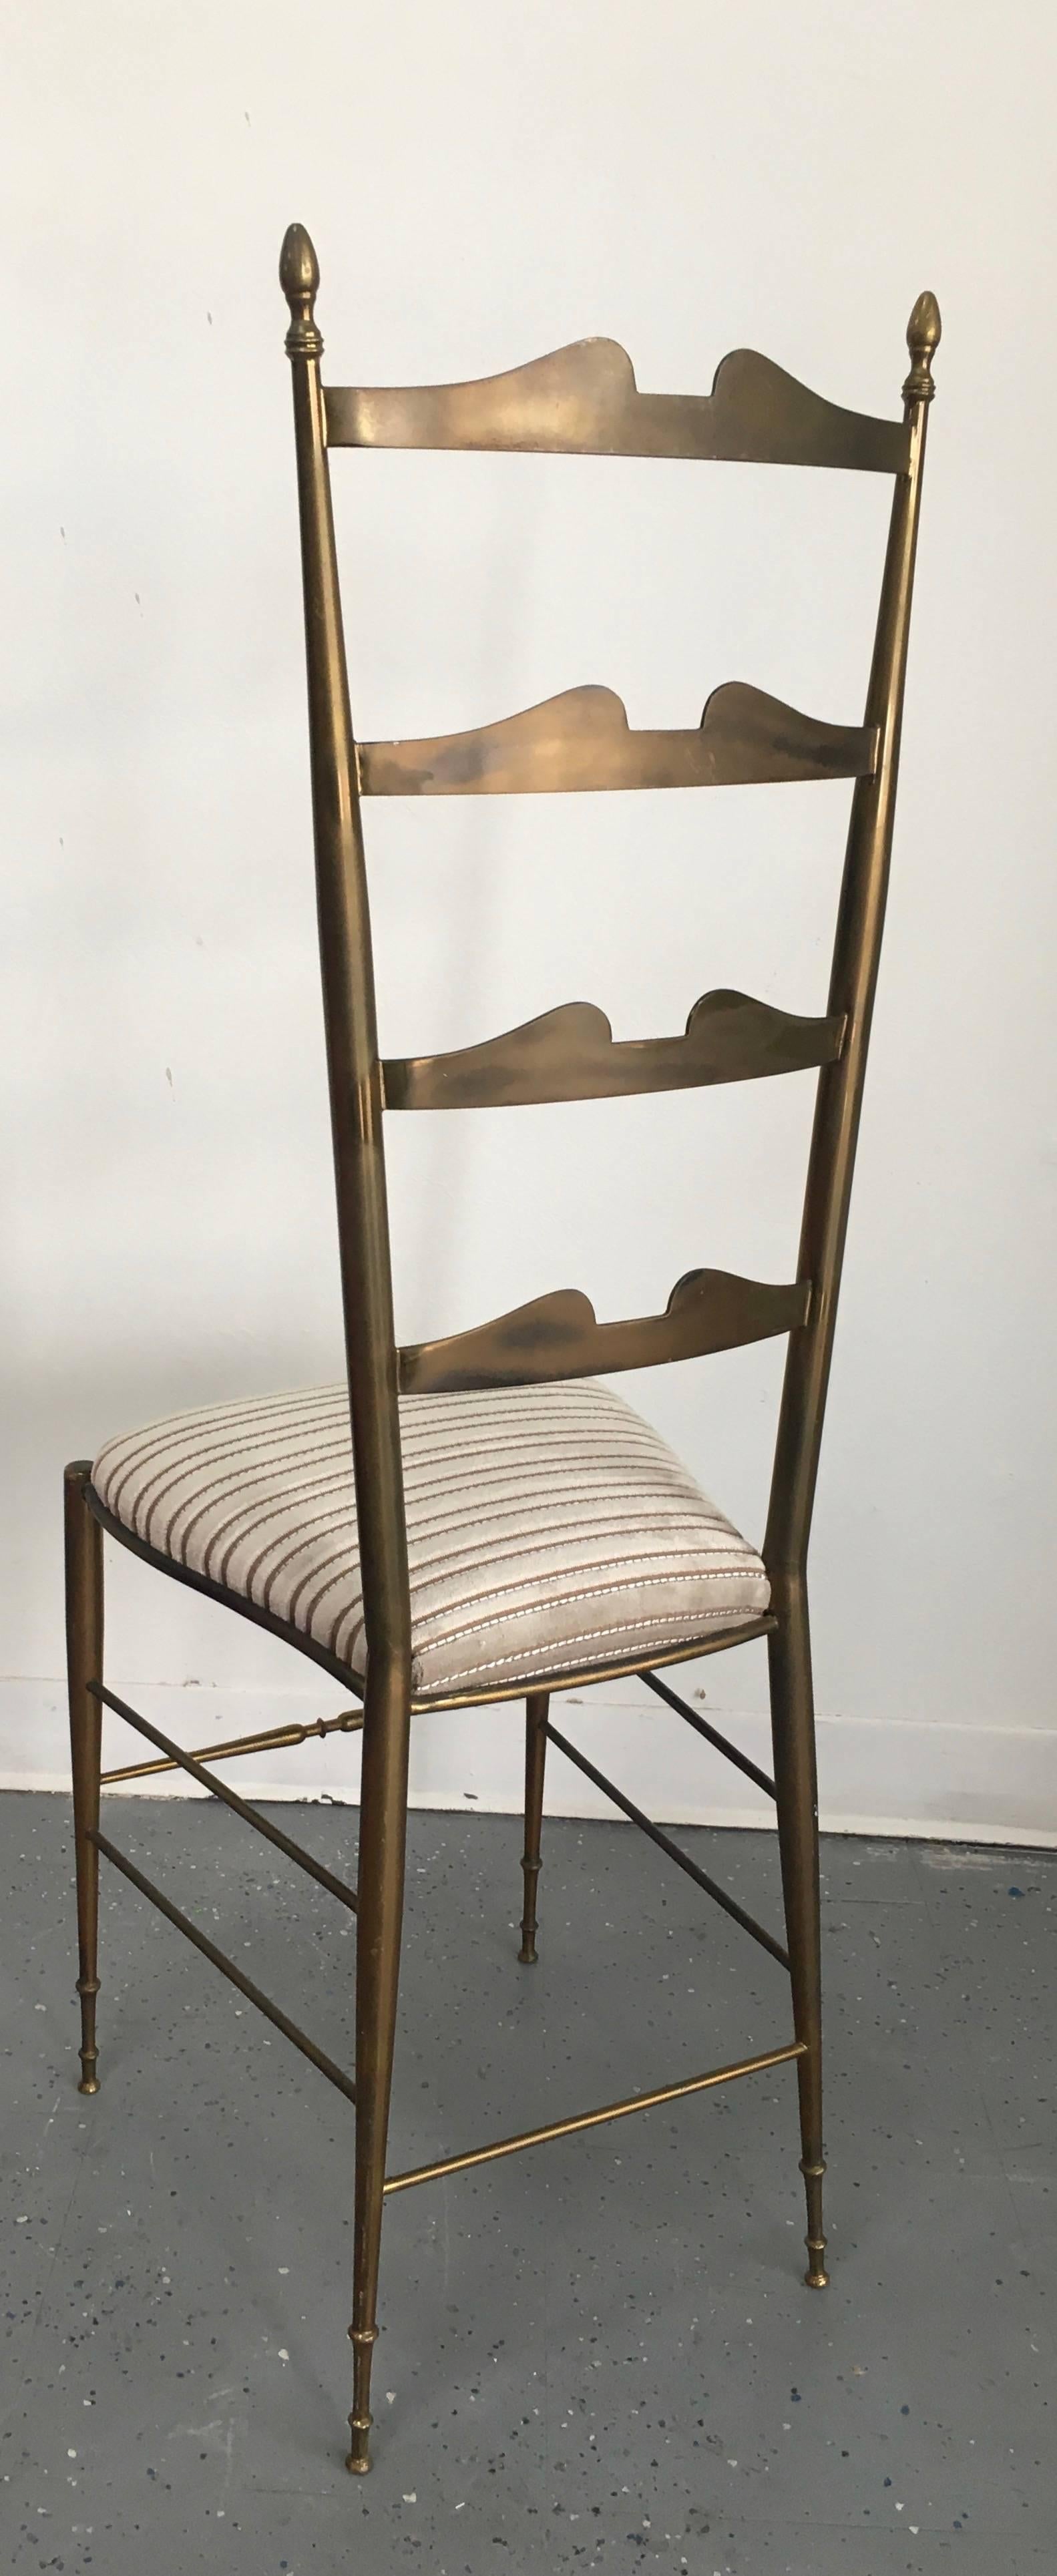 The ladder back Italian brass Chiavari chair attributed to Gio Ponti, is simple and elegant - alone making a functional statement. The chair is covered in Imported French Mohair and silk striped Upholstery. 

The chair alone would be a perfect